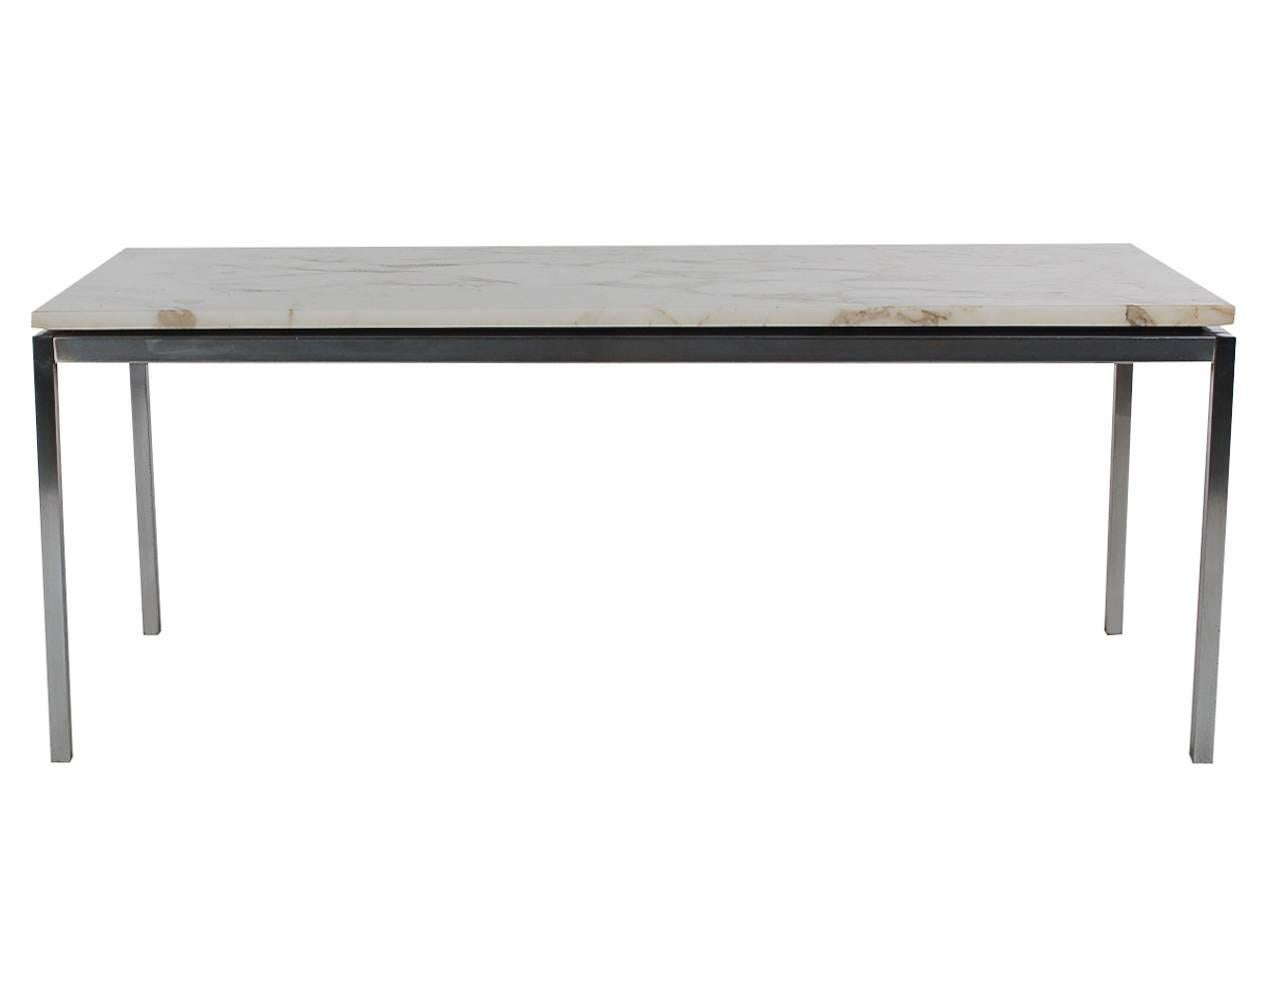 American Mid-Century Modern Marble Cocktail Table by Florence Knoll for Knoll